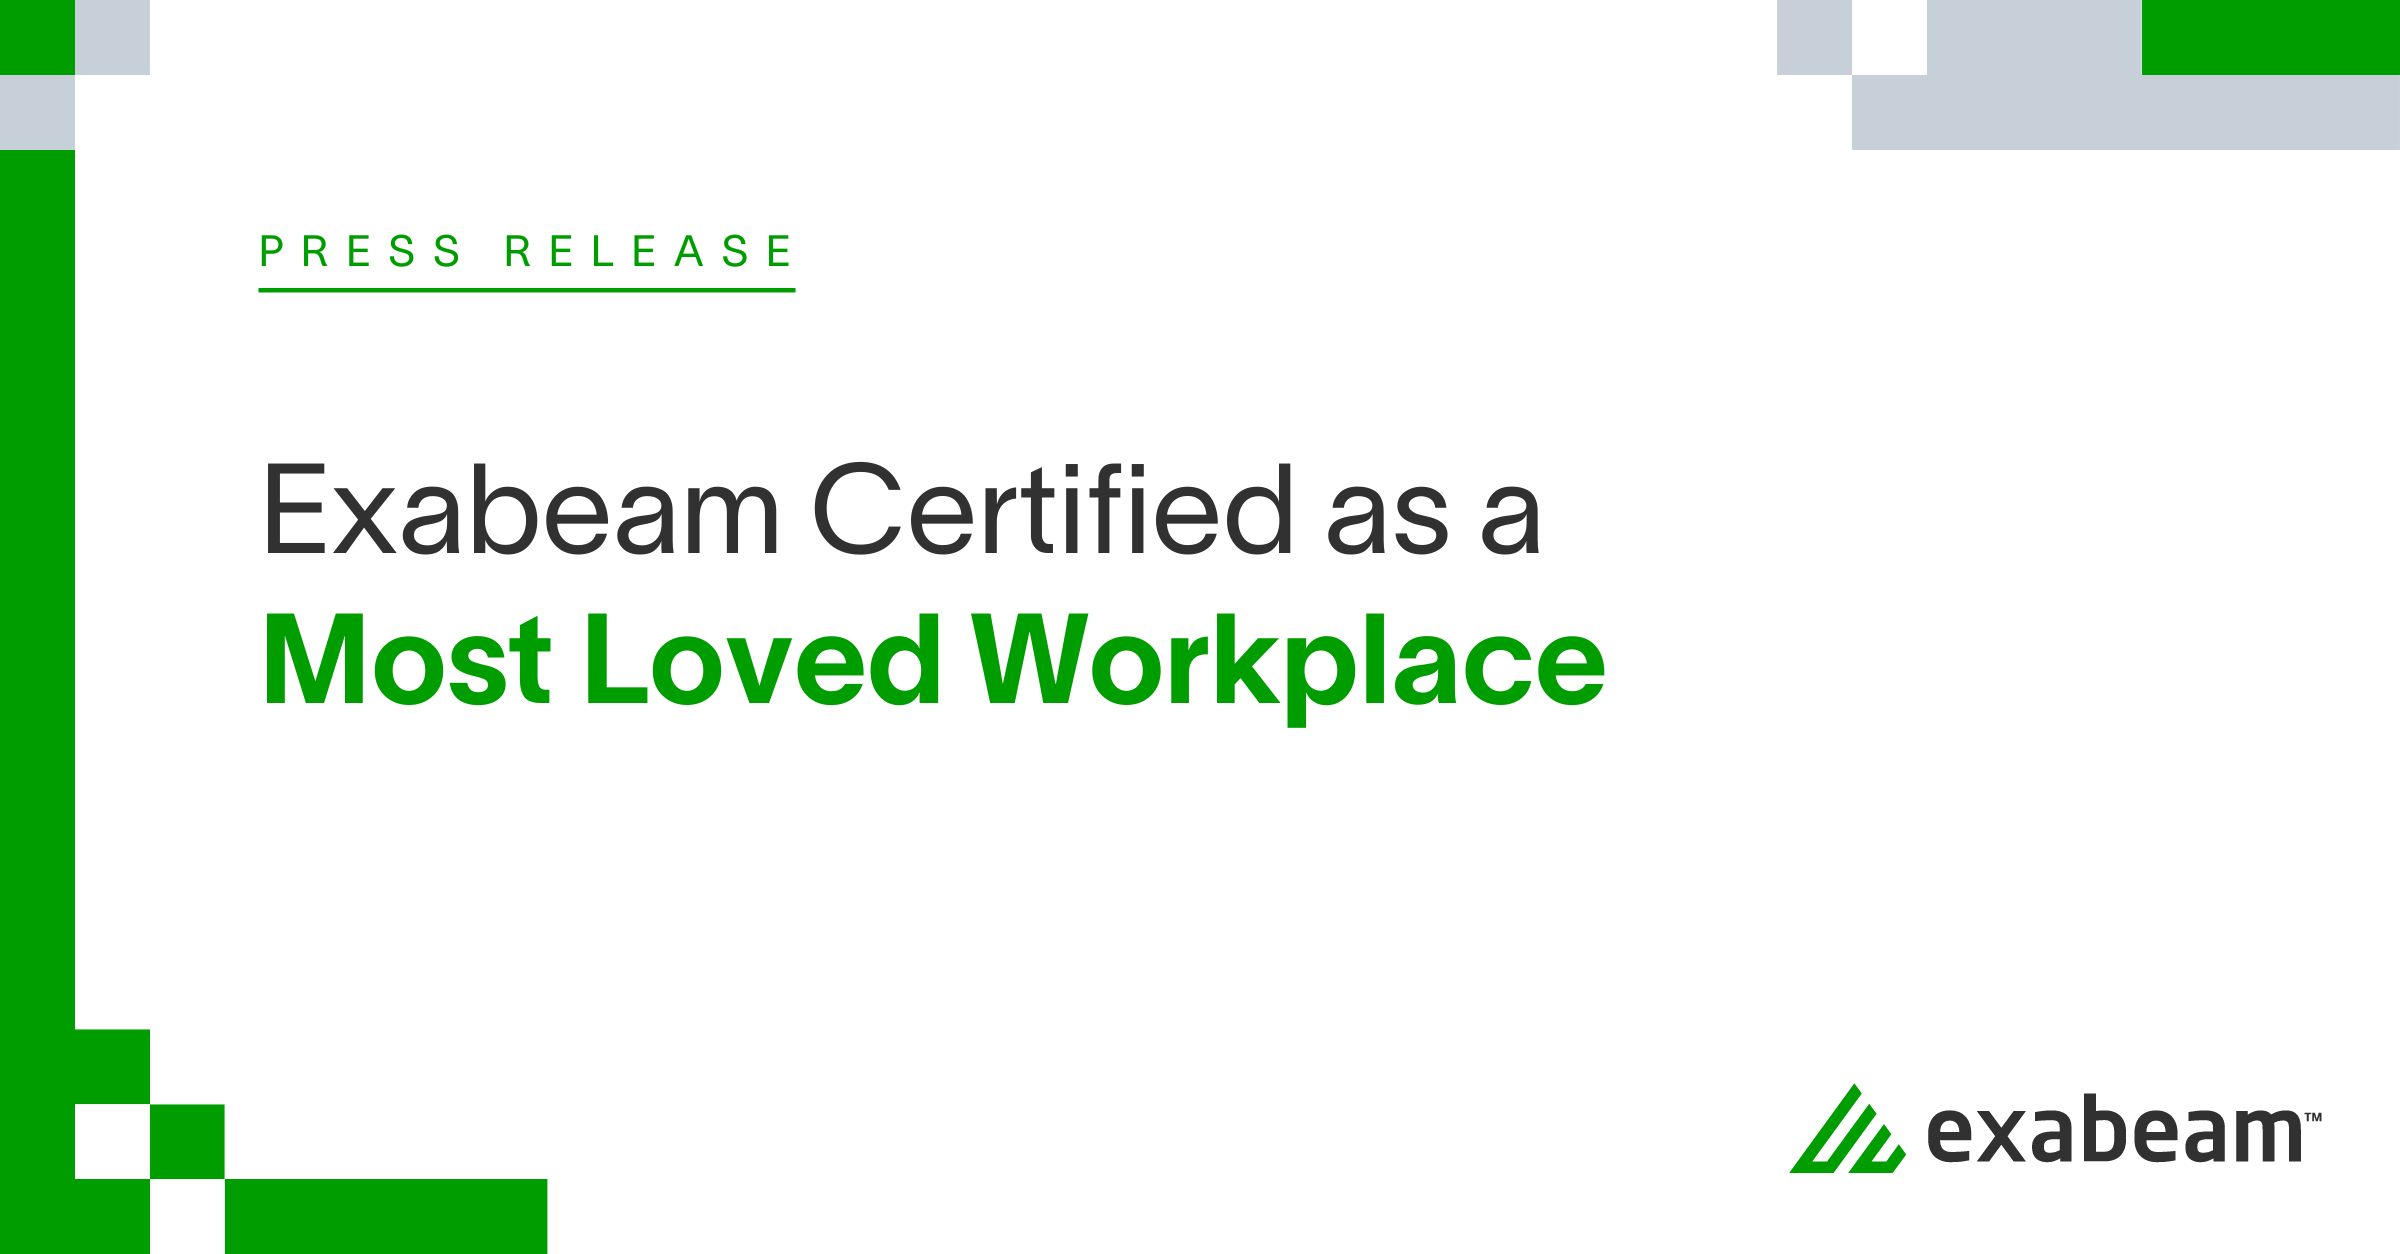 Exabeam Certified as a Most Loved Workplace